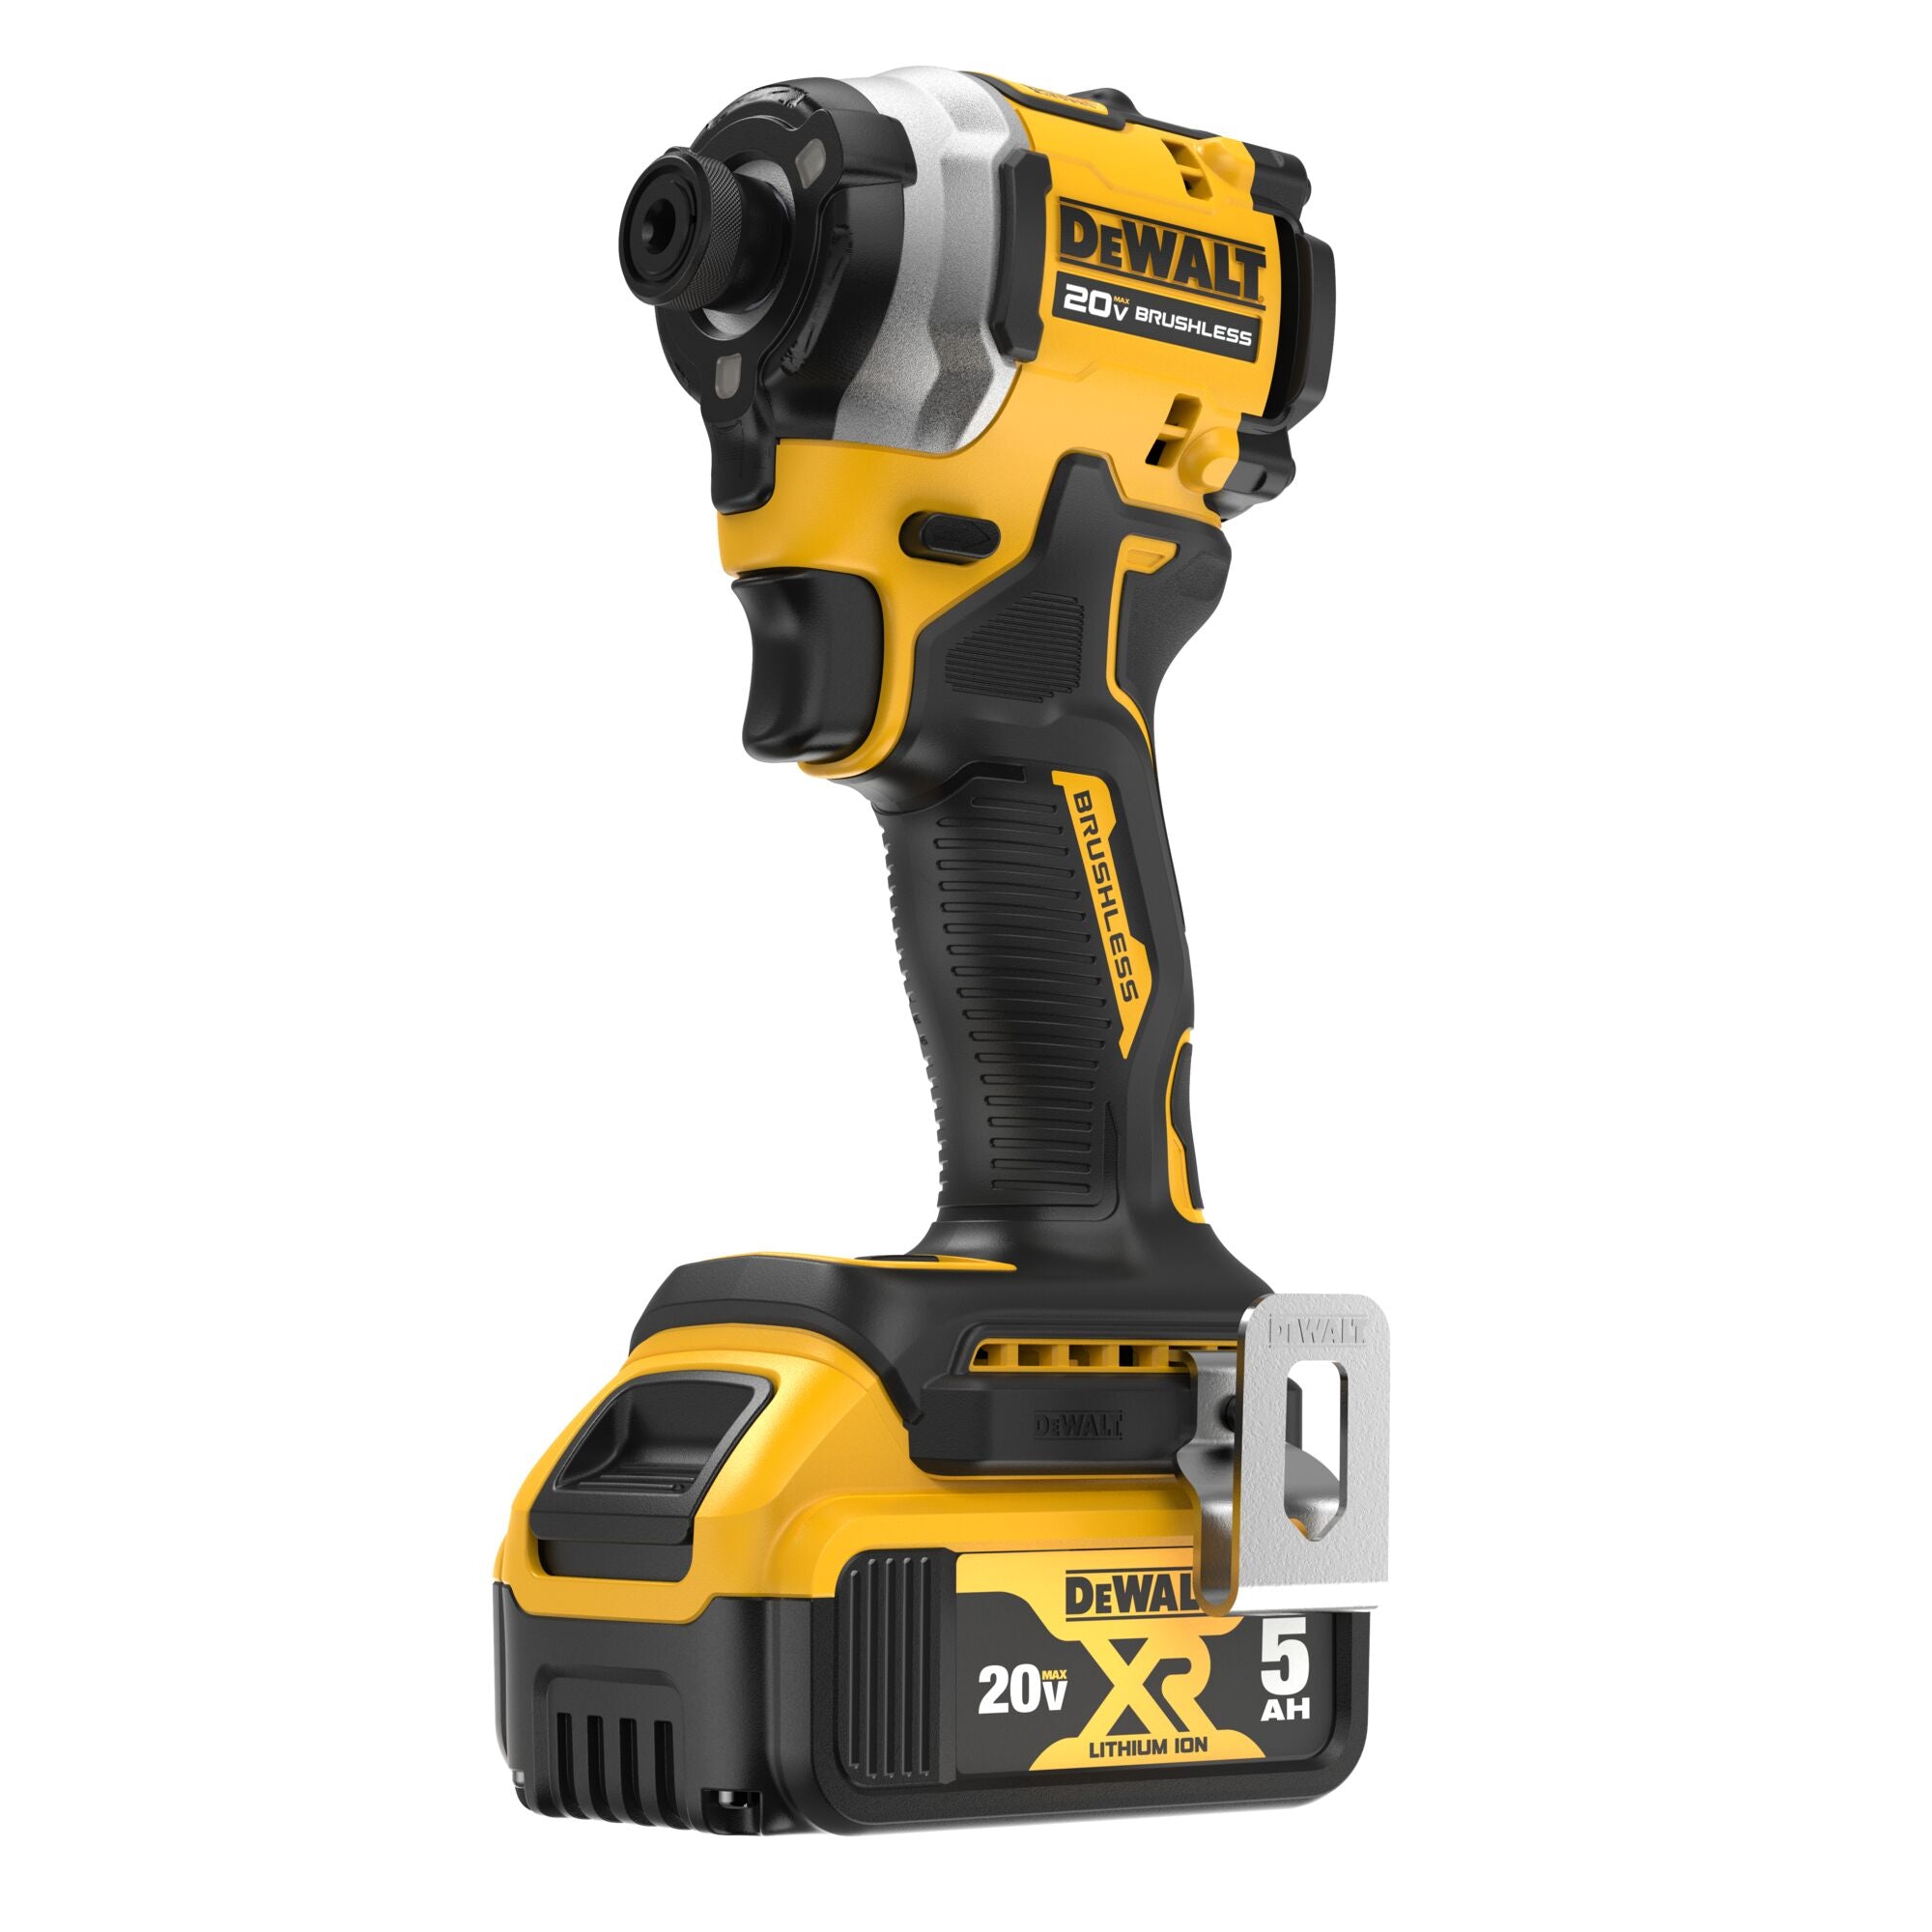 DeWALT DCF850P1 Atomic Impact Drill 1/4" 20 Volt Cordless, Brushless Tool, Bag, One Battery and Charger